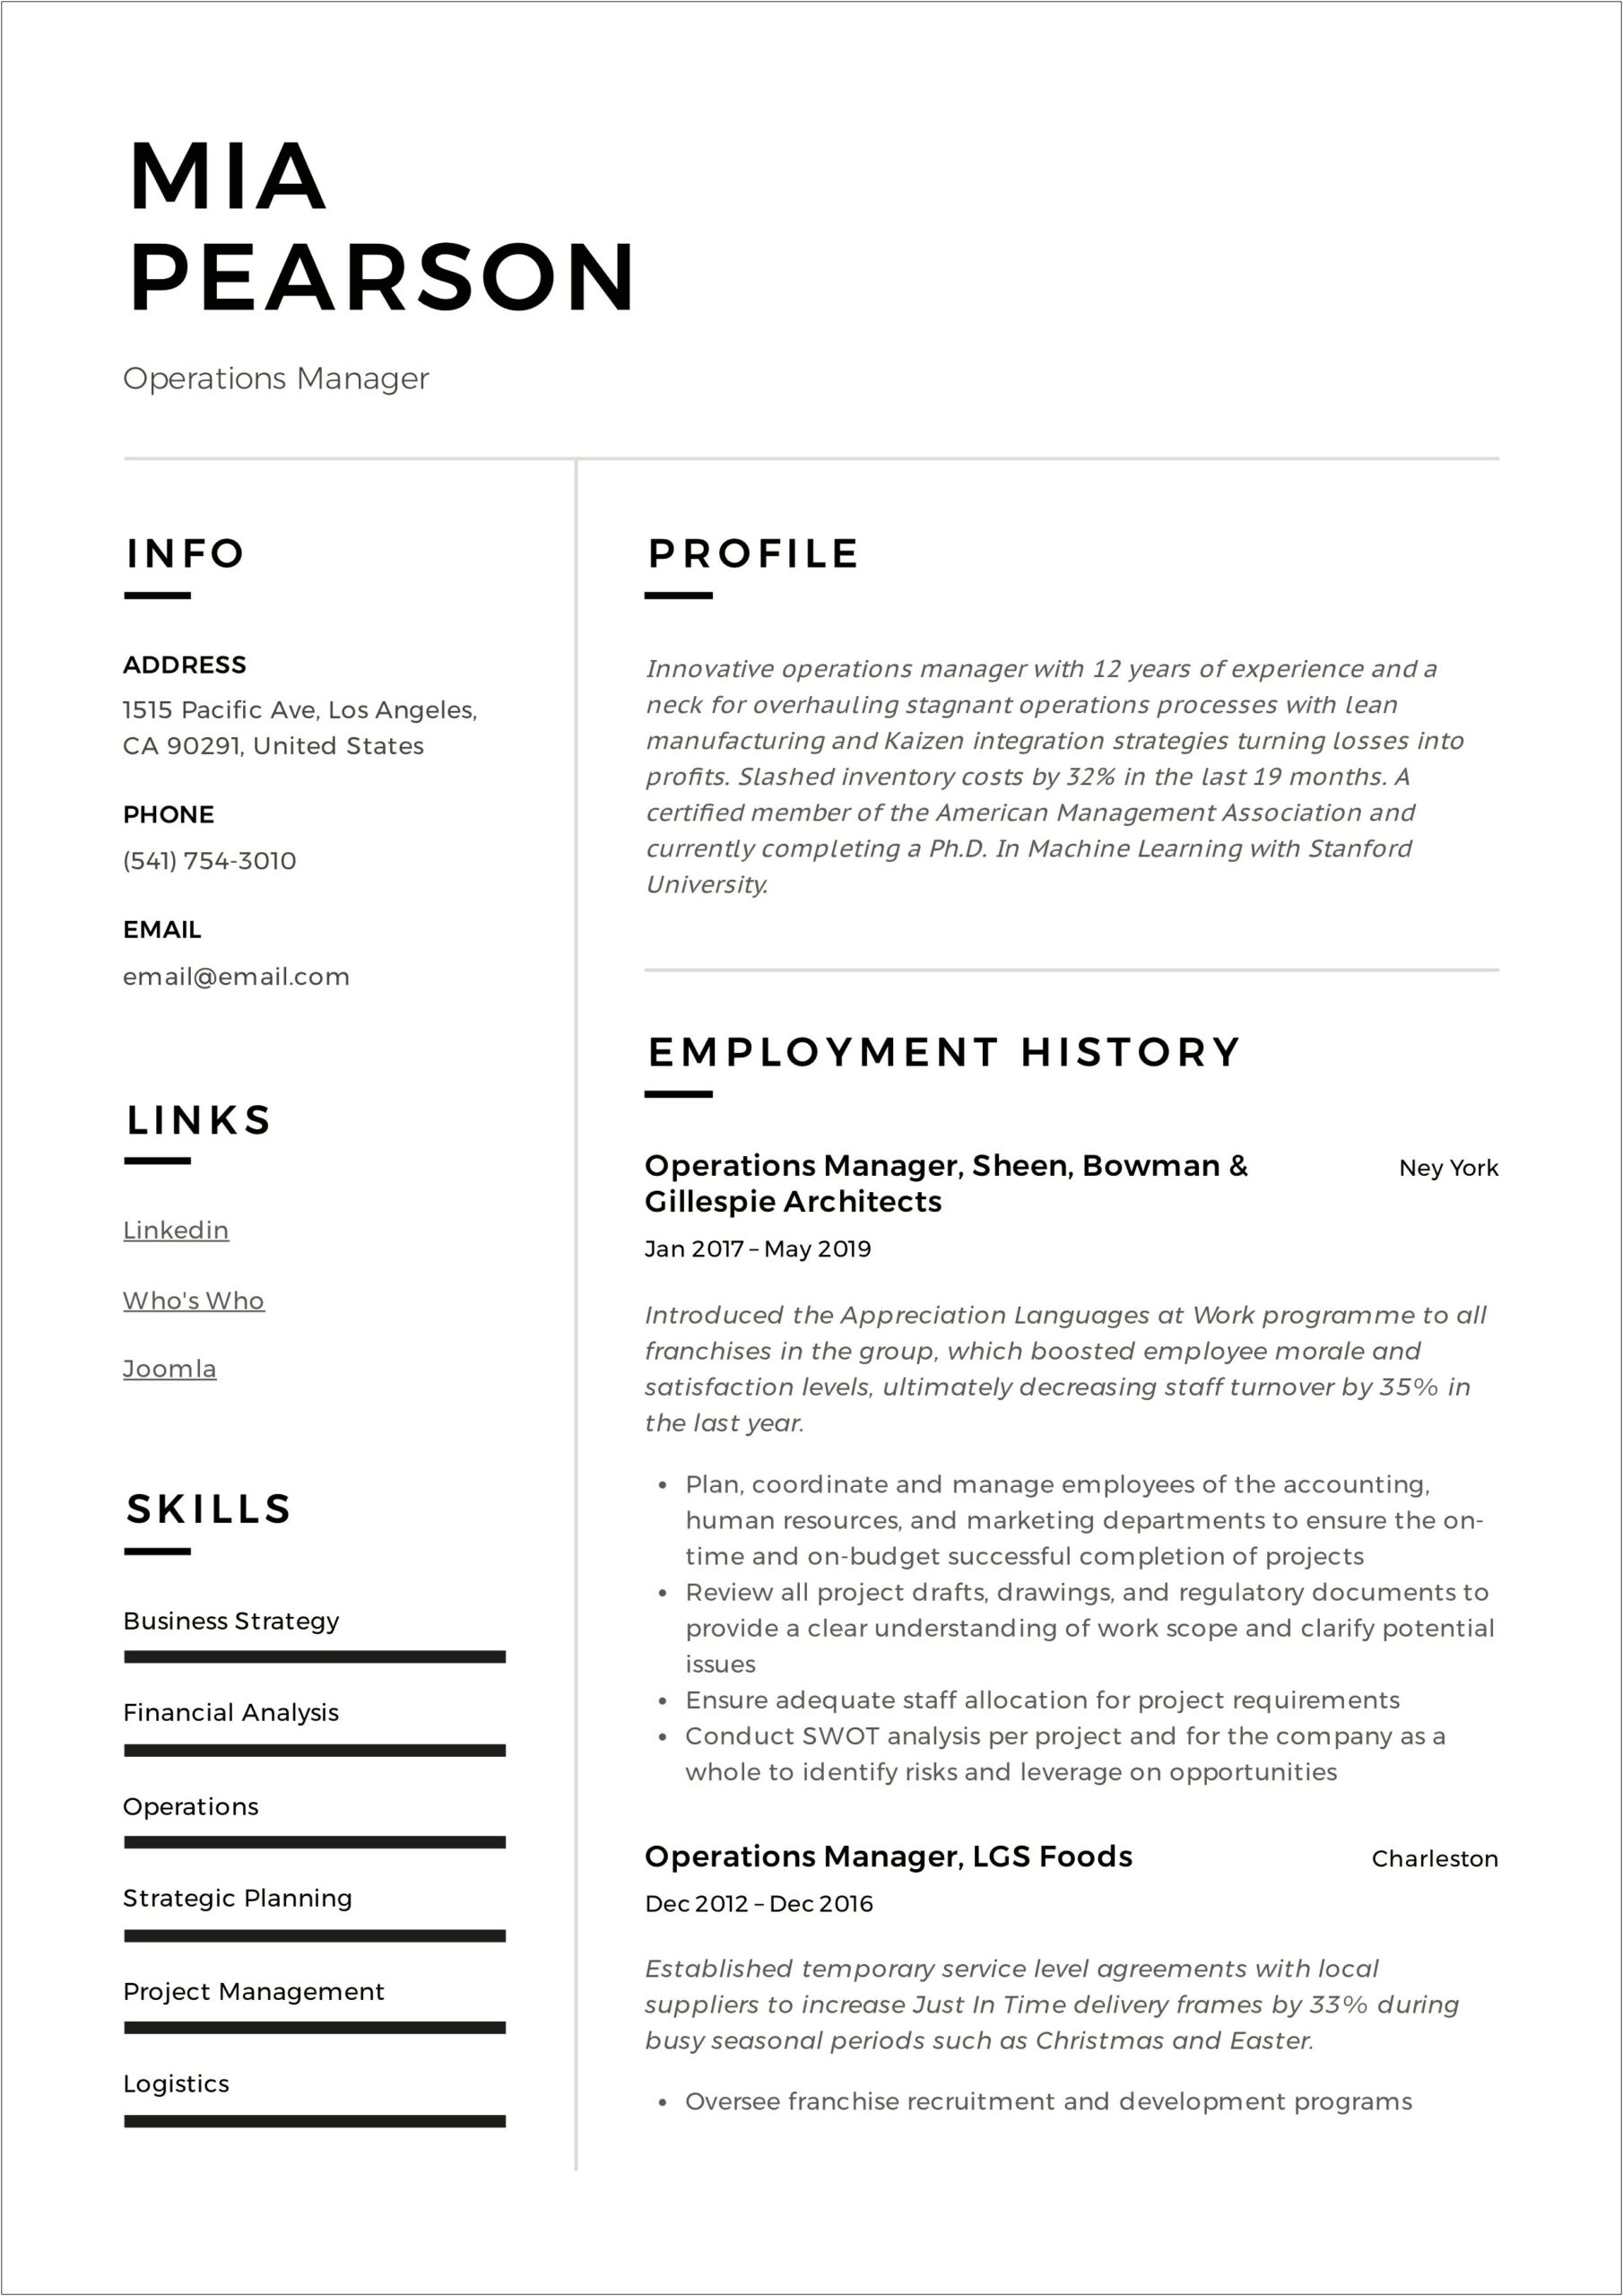 Legal Operations Manager Resume Sample